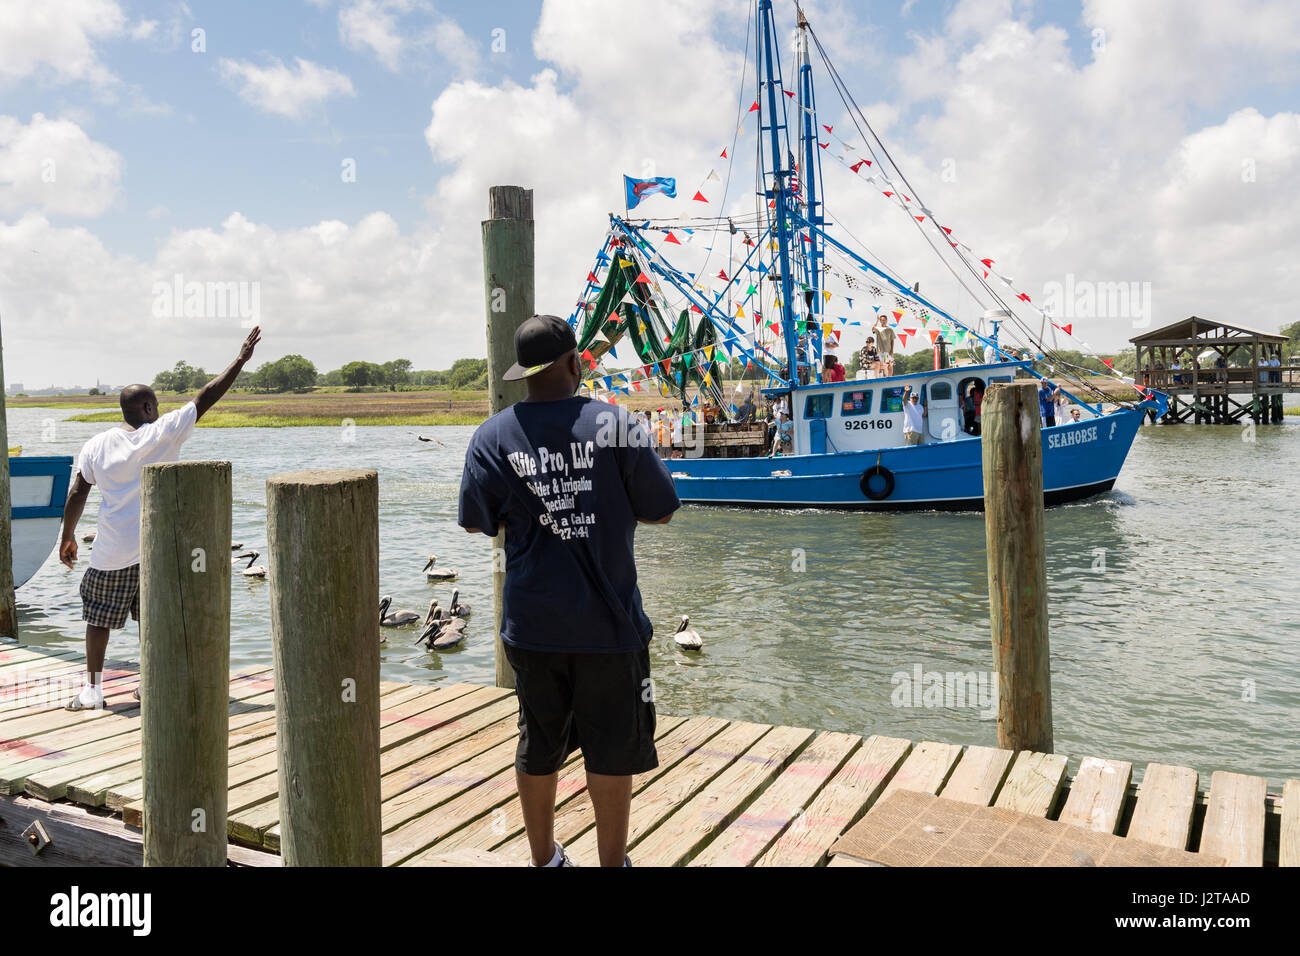 Charleston, USA. 30th Apr, 2017. People watch a decorated shrimp boat parading down Shem Creek during the annual Blessing of the Fleet signifying the start of the commercial shrimping season April 30, 2017 in Mount Pleasant, South Carolina. Coastal shrimping is part of the low country heritage but has been declining rapidly with rising costs and increased foreign competition. Credit: Planetpix/Alamy Live News Stock Photo